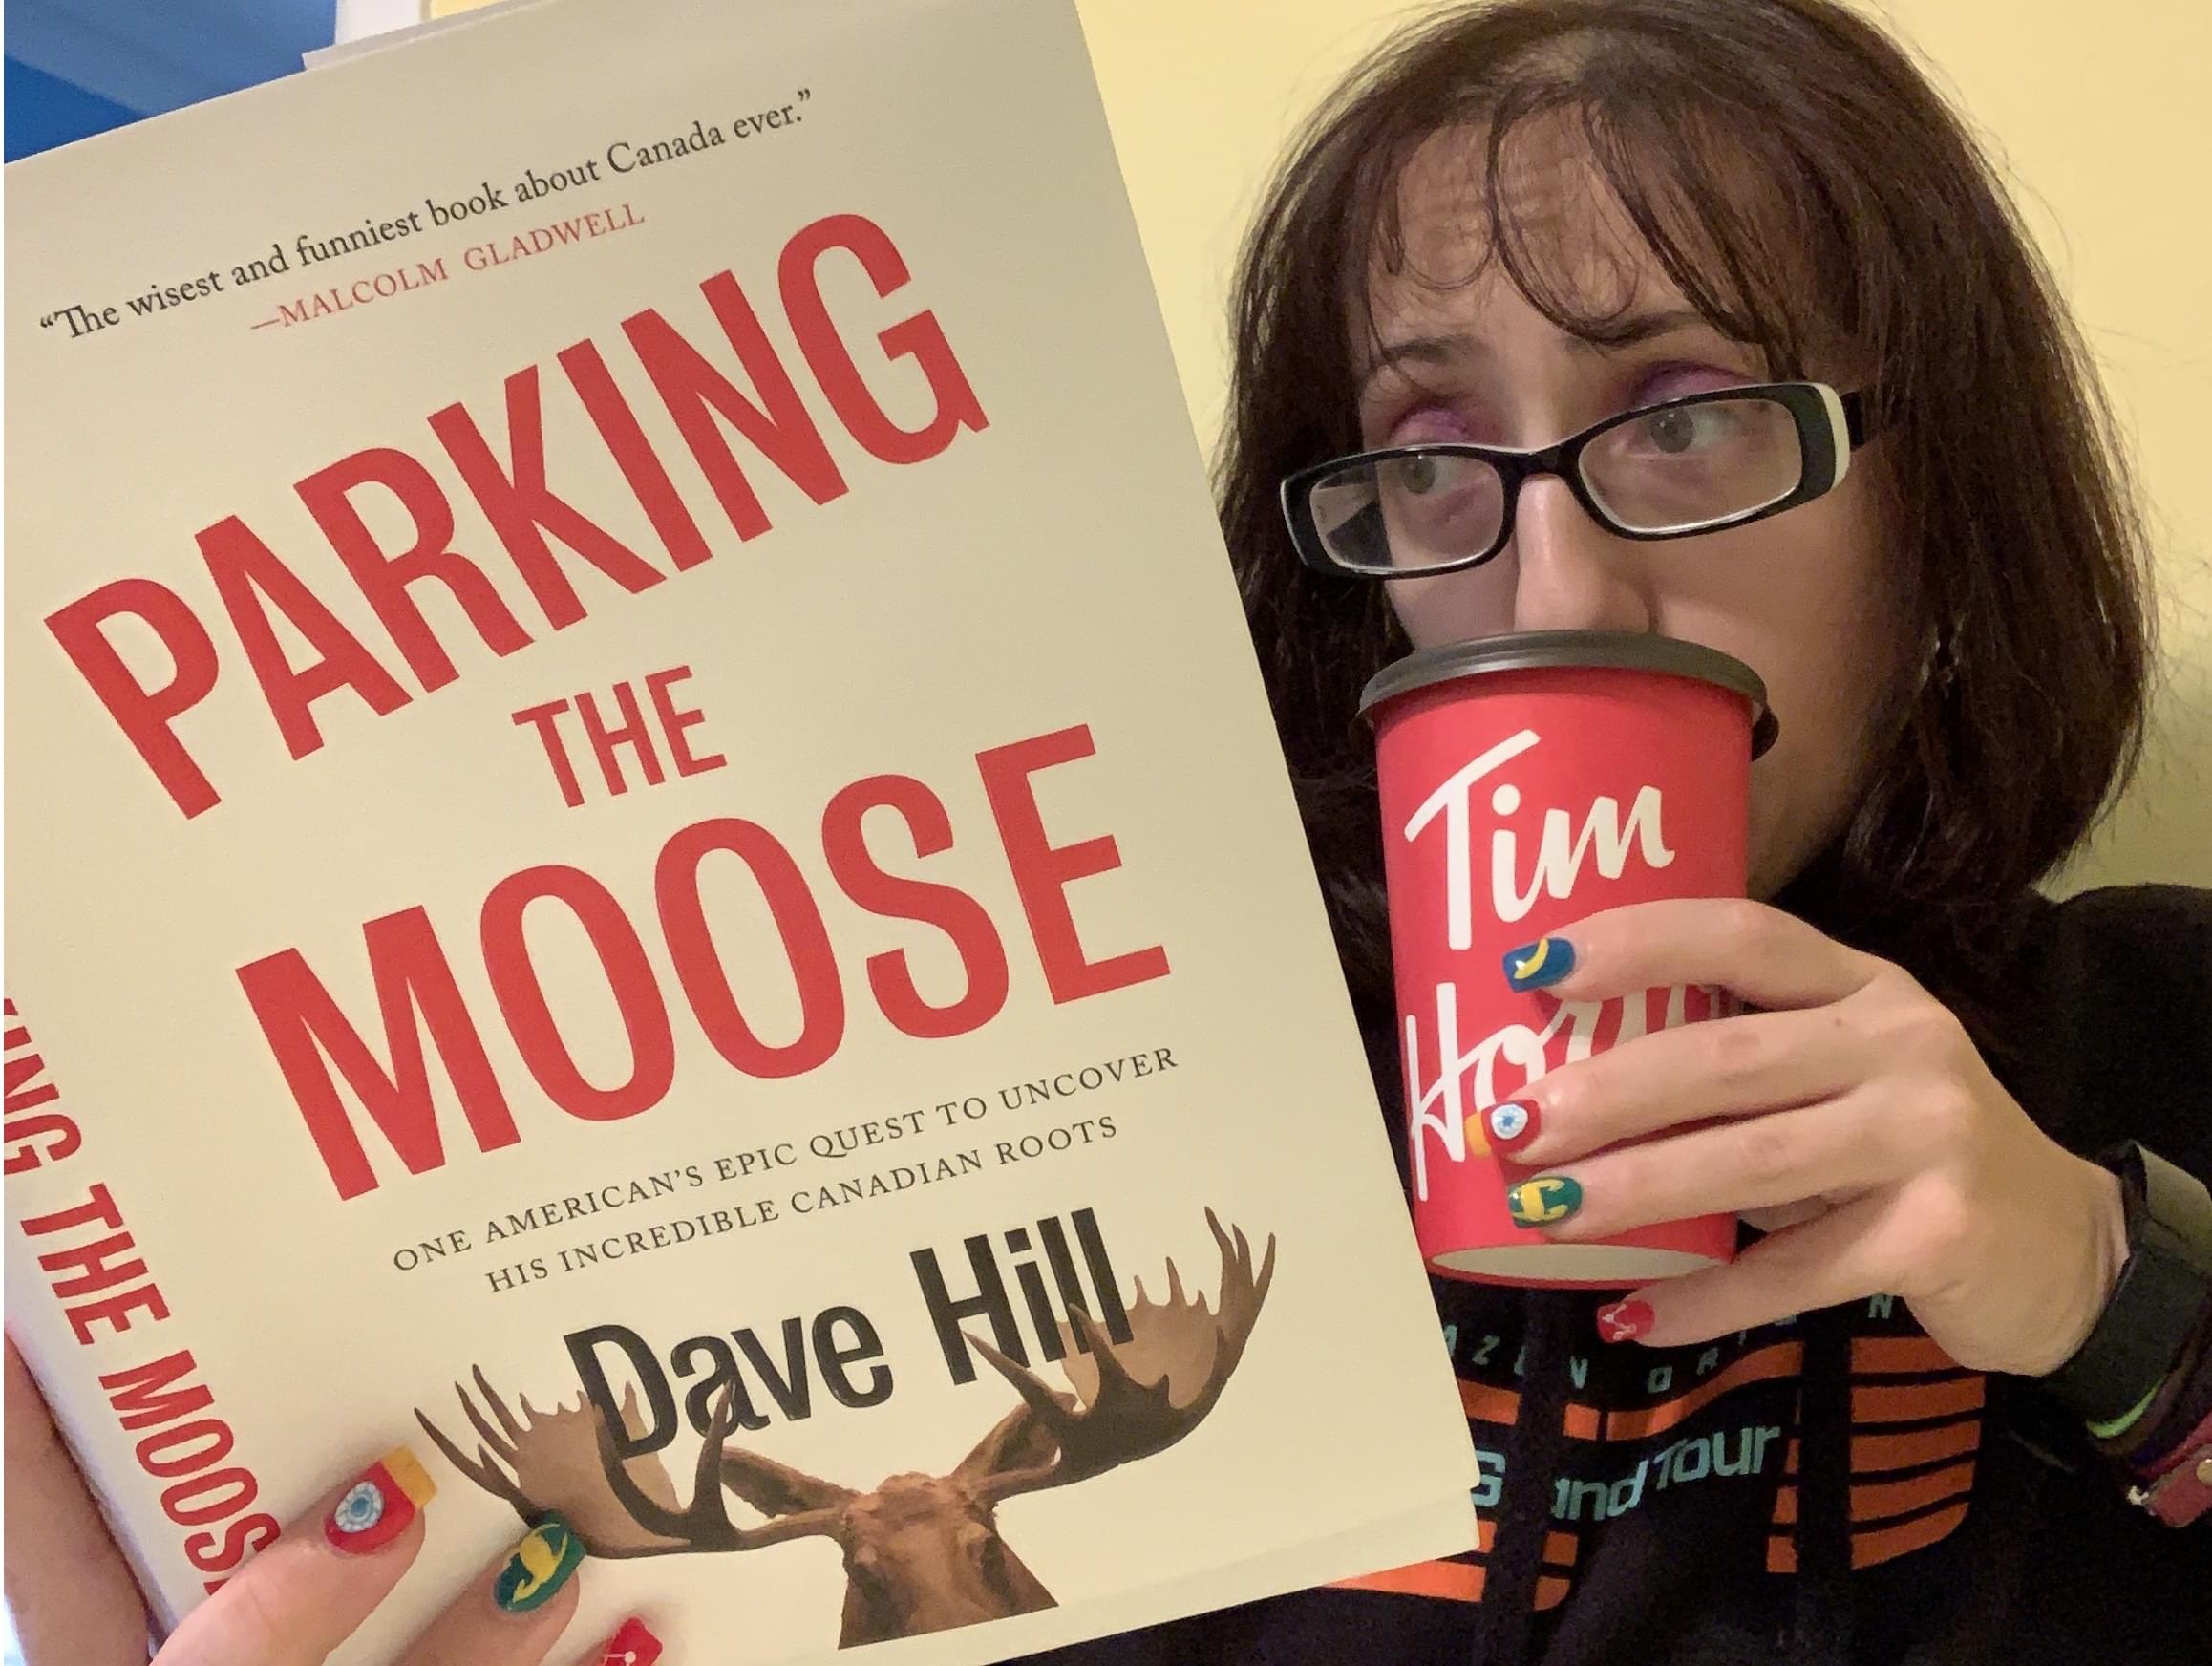 Mid-Day Jamie travels to McNally Jackson Books for Dave Hill’s Parking The Moose Book Launch Party!